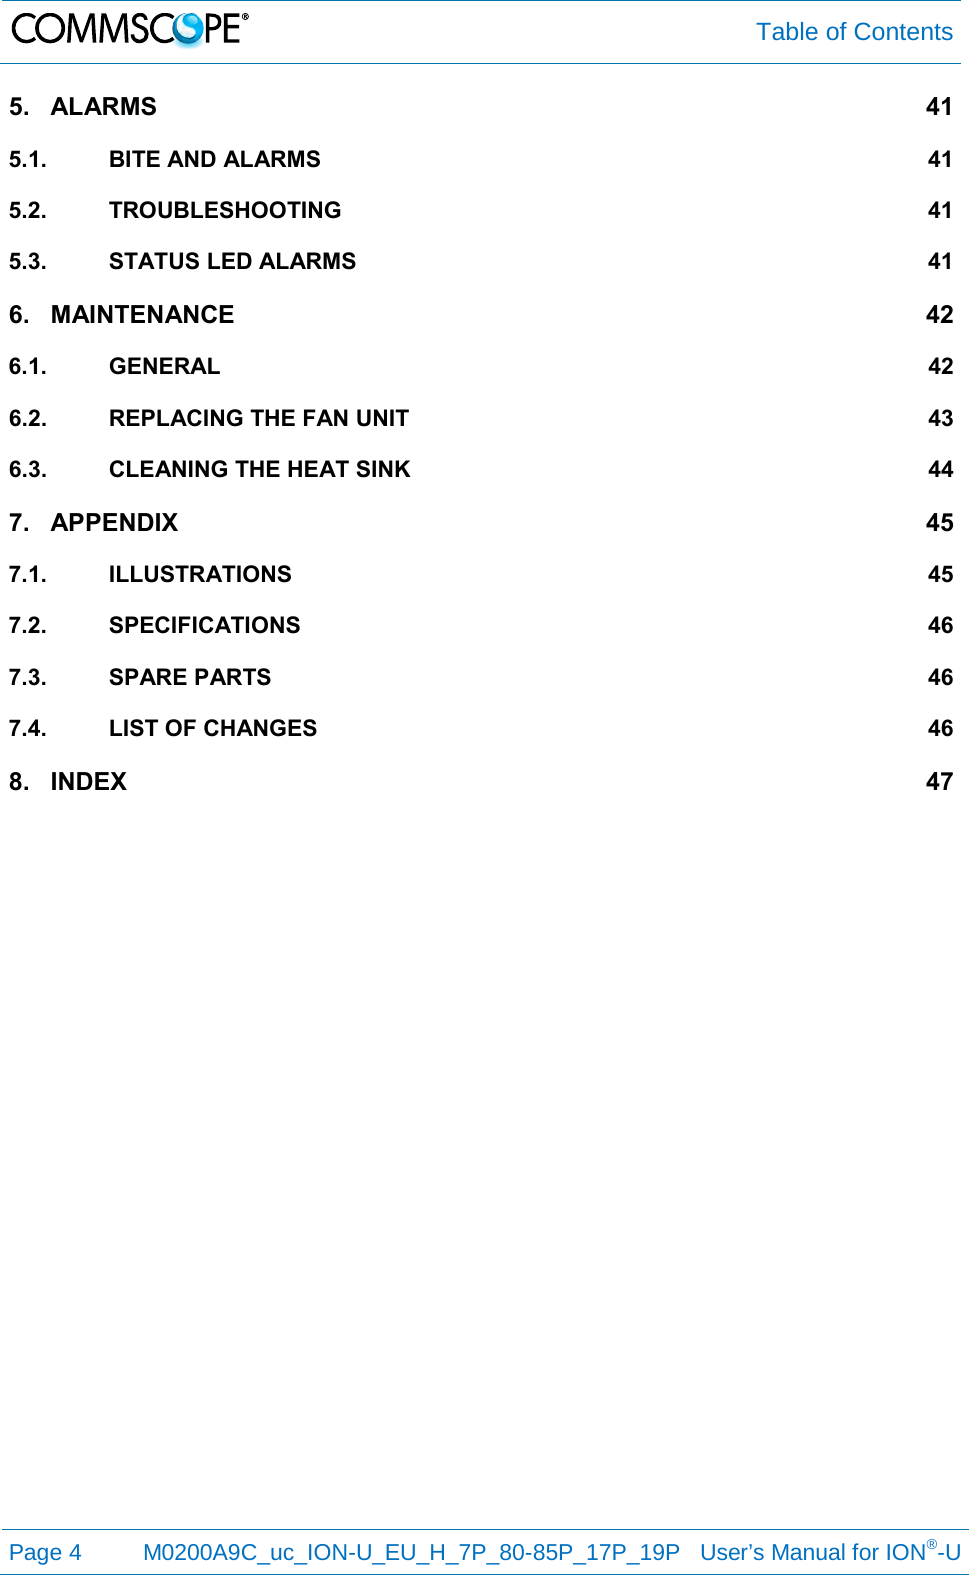  Table of Contents  Page 4  M0200A9C_uc_ION-U_EU_H_7P_80-85P_17P_19P   User’s Manual for ION®-U  5. ALARMS 41 5.1. BITE AND ALARMS 41 5.2. TROUBLESHOOTING 41 5.3. STATUS LED ALARMS 41 6. MAINTENANCE 42 6.1. GENERAL 42 6.2. REPLACING THE FAN UNIT 43 6.3. CLEANING THE HEAT SINK 44 7. APPENDIX 45 7.1. ILLUSTRATIONS 45 7.2. SPECIFICATIONS 46 7.3. SPARE PARTS 46 7.4. LIST OF CHANGES 46 8. INDEX 47  